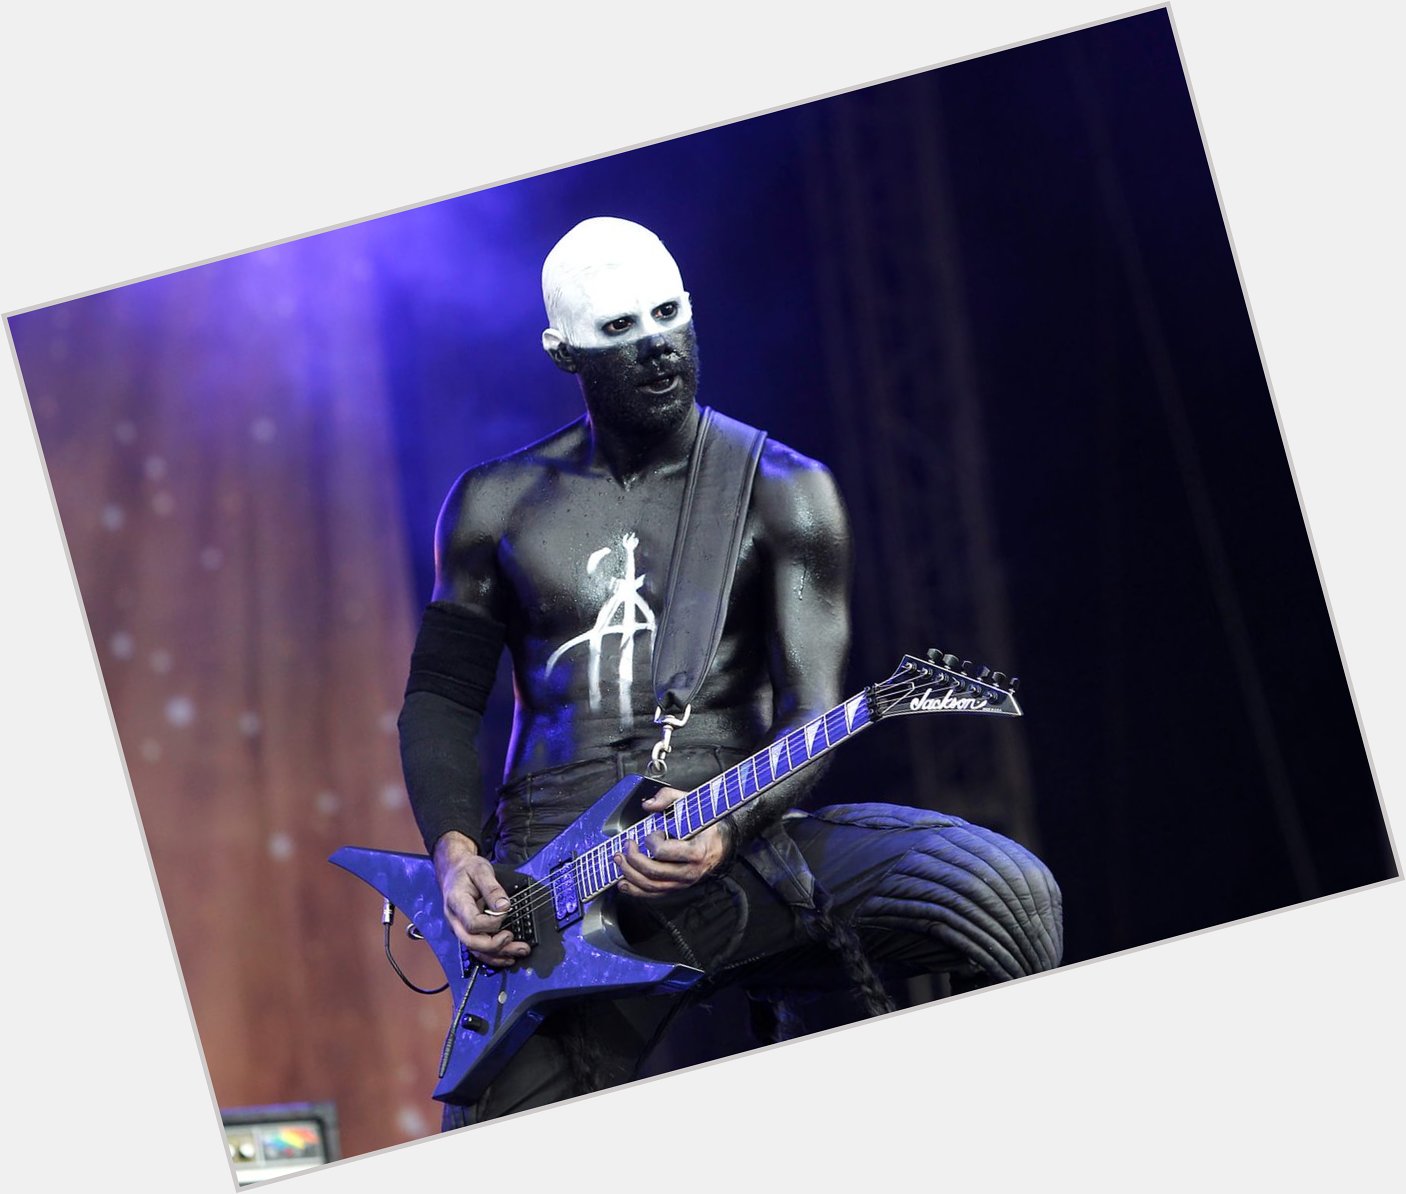 Happy 48th birthday to the amazing Wes Borland. The coolest guitarist I\ve ever seen 